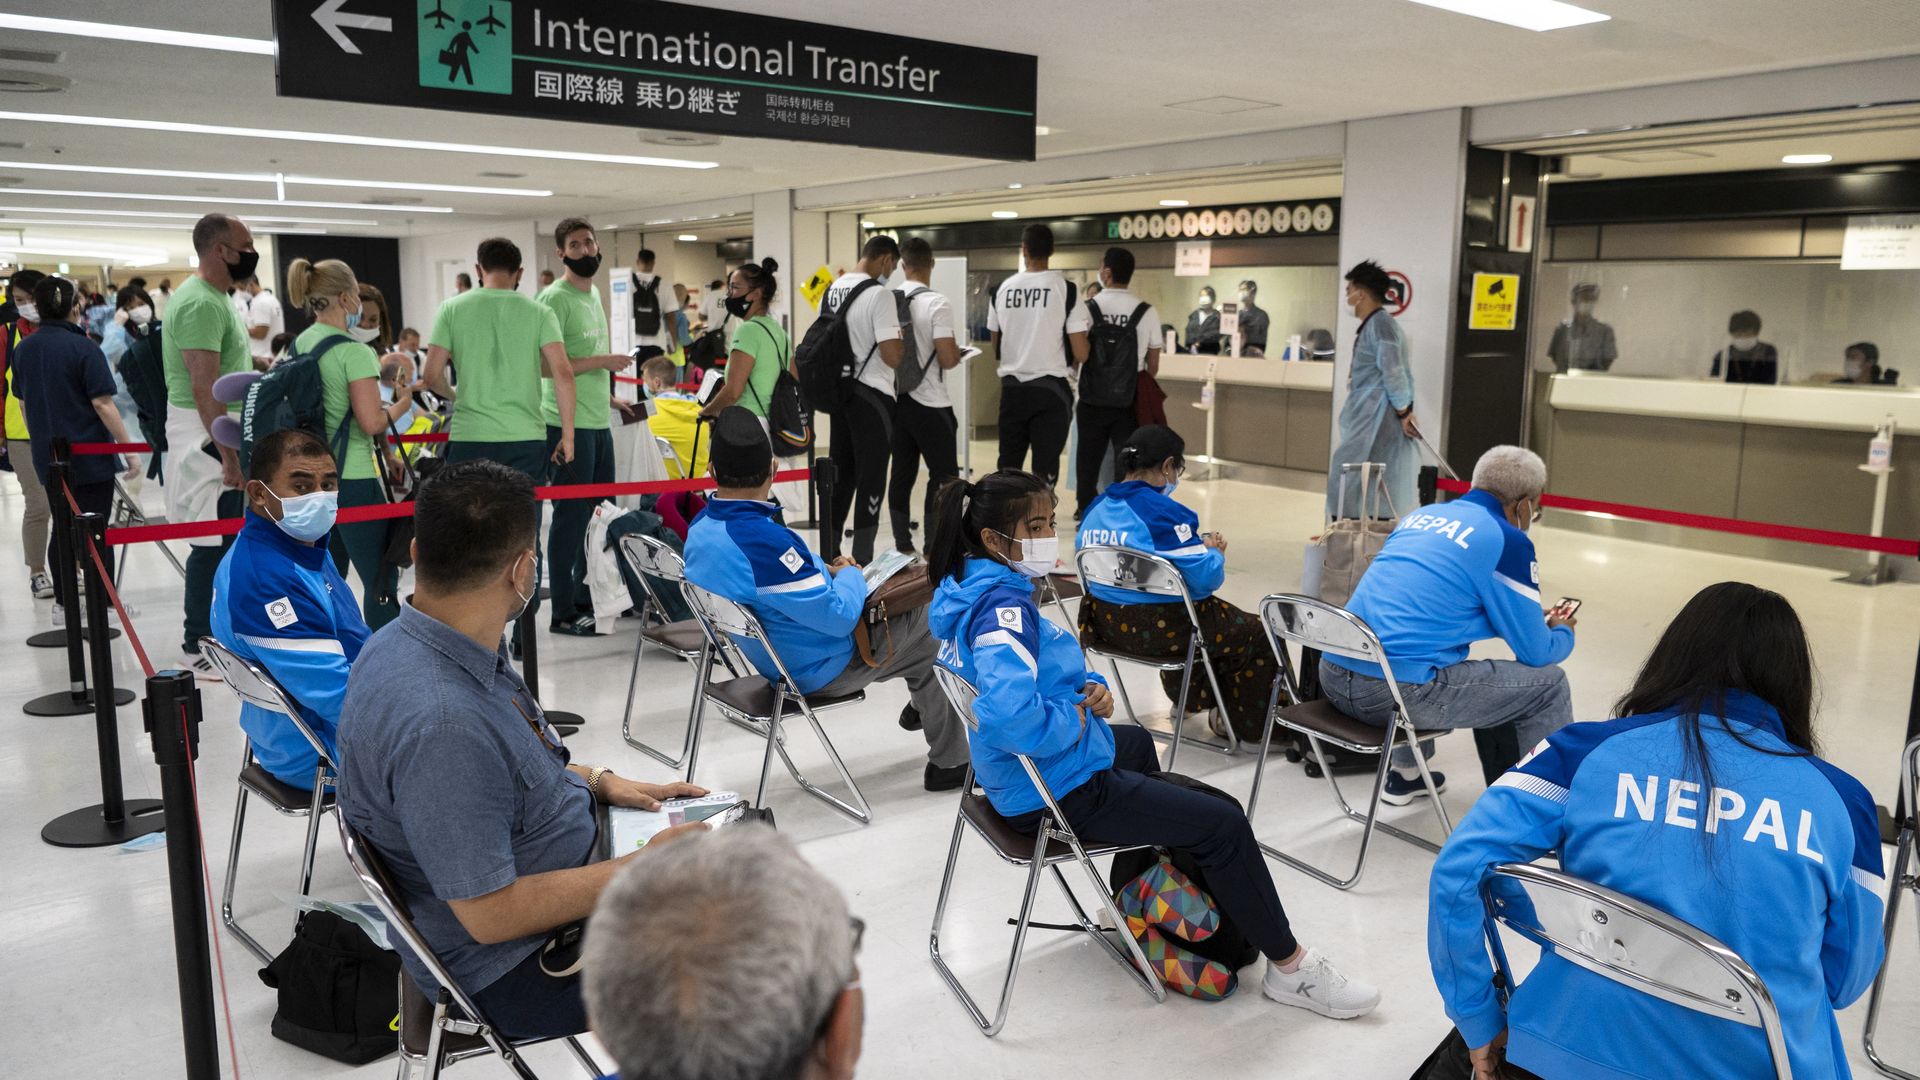 The members of different delegations wait for their Covid-19 test results after arriving for the Tokyo 2020 Olympic Games at Narita International Airport in Narita, Chiba prefecture.